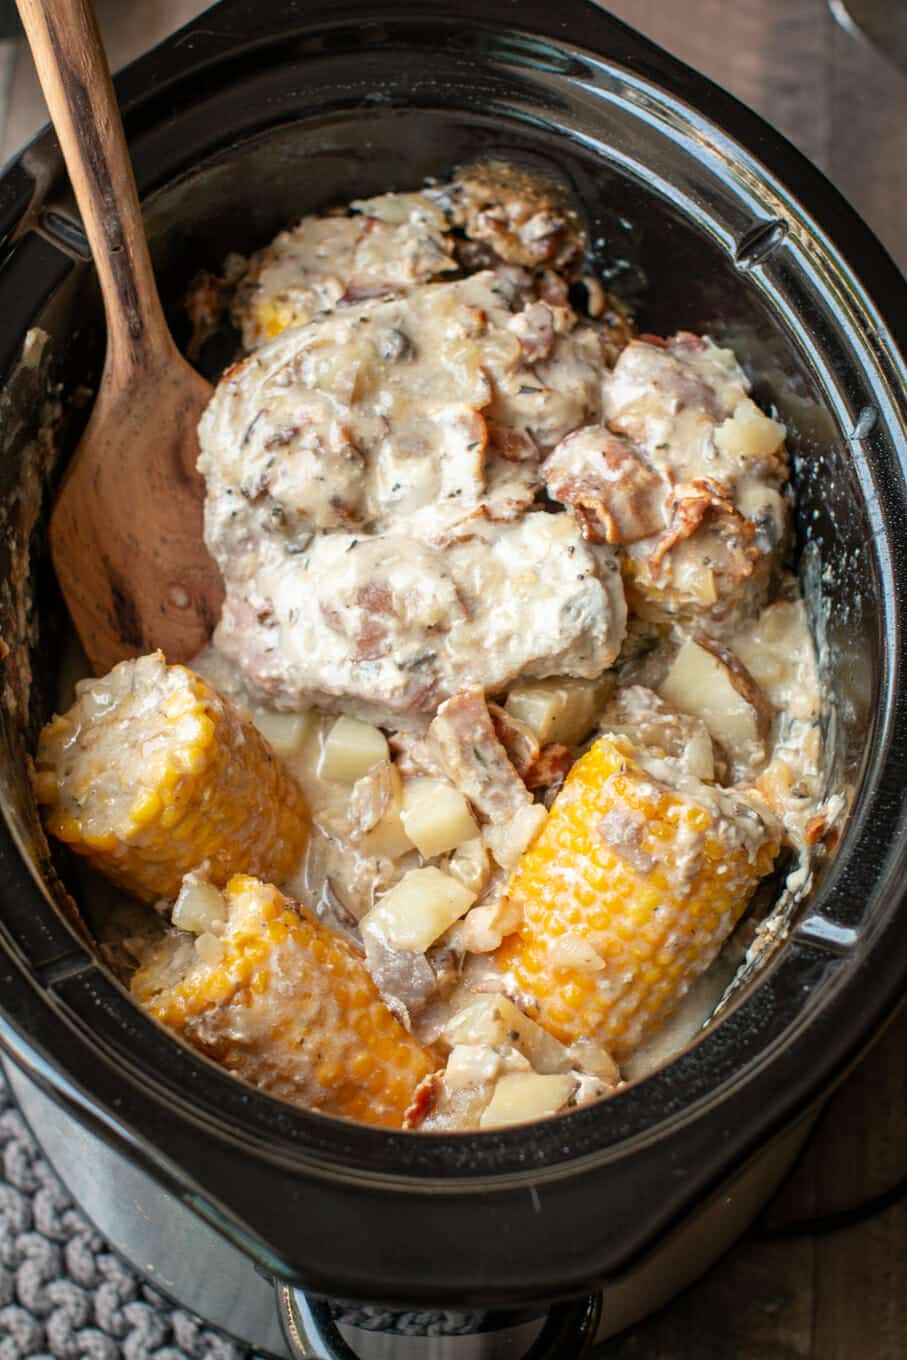 corn, pork chops, and sauce in slow cooker